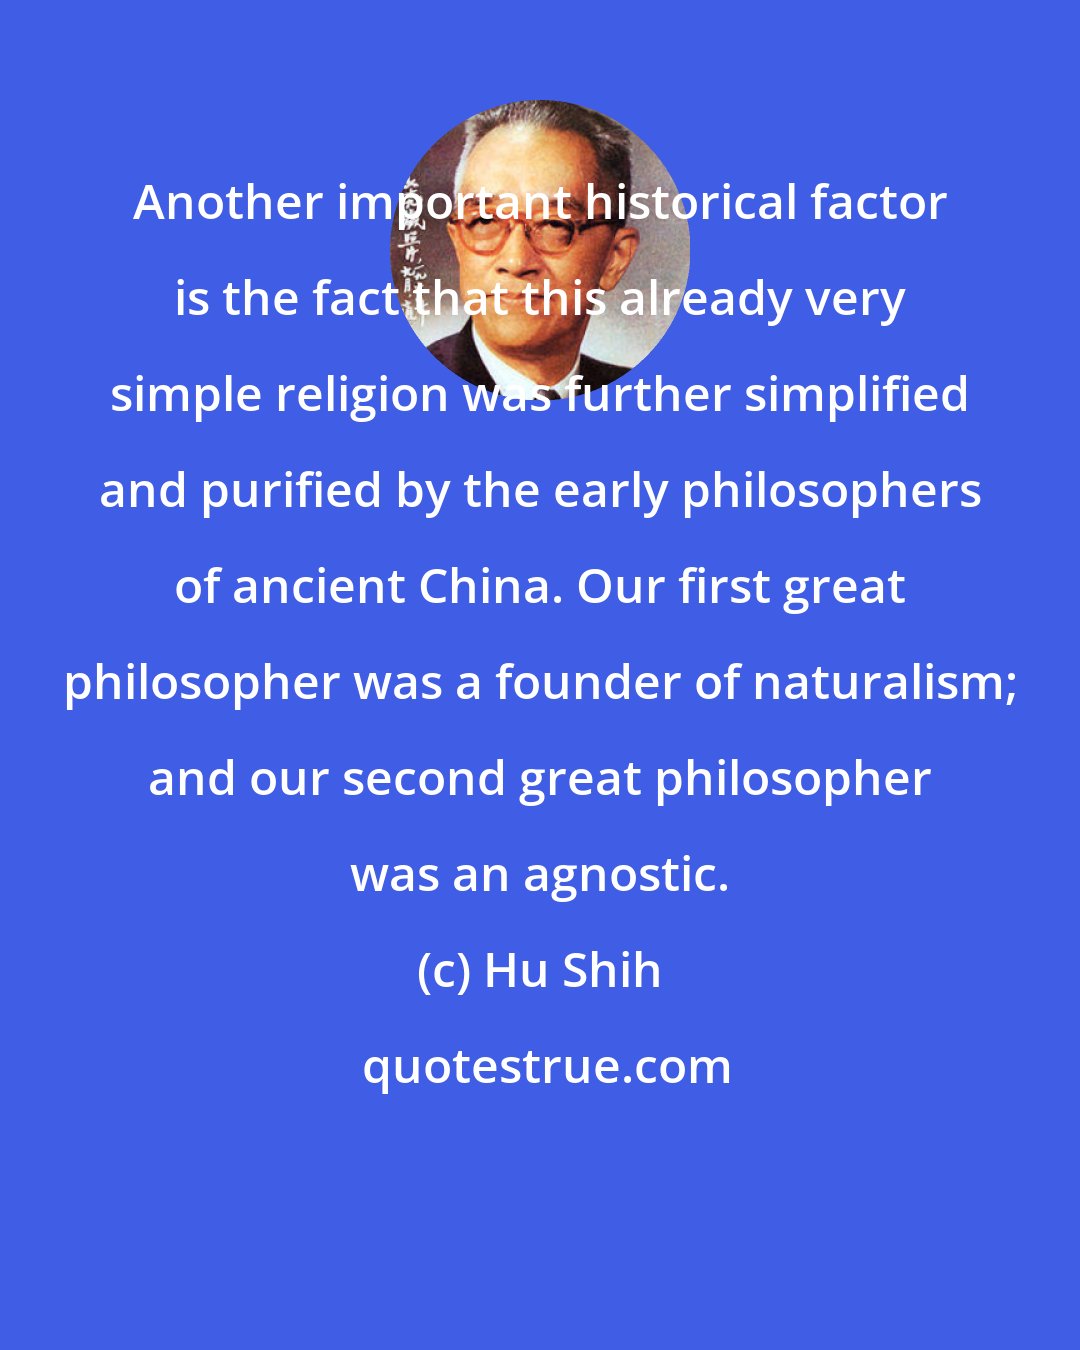 Hu Shih: Another important historical factor is the fact that this already very simple religion was further simplified and purified by the early philosophers of ancient China. Our first great philosopher was a founder of naturalism; and our second great philosopher was an agnostic.